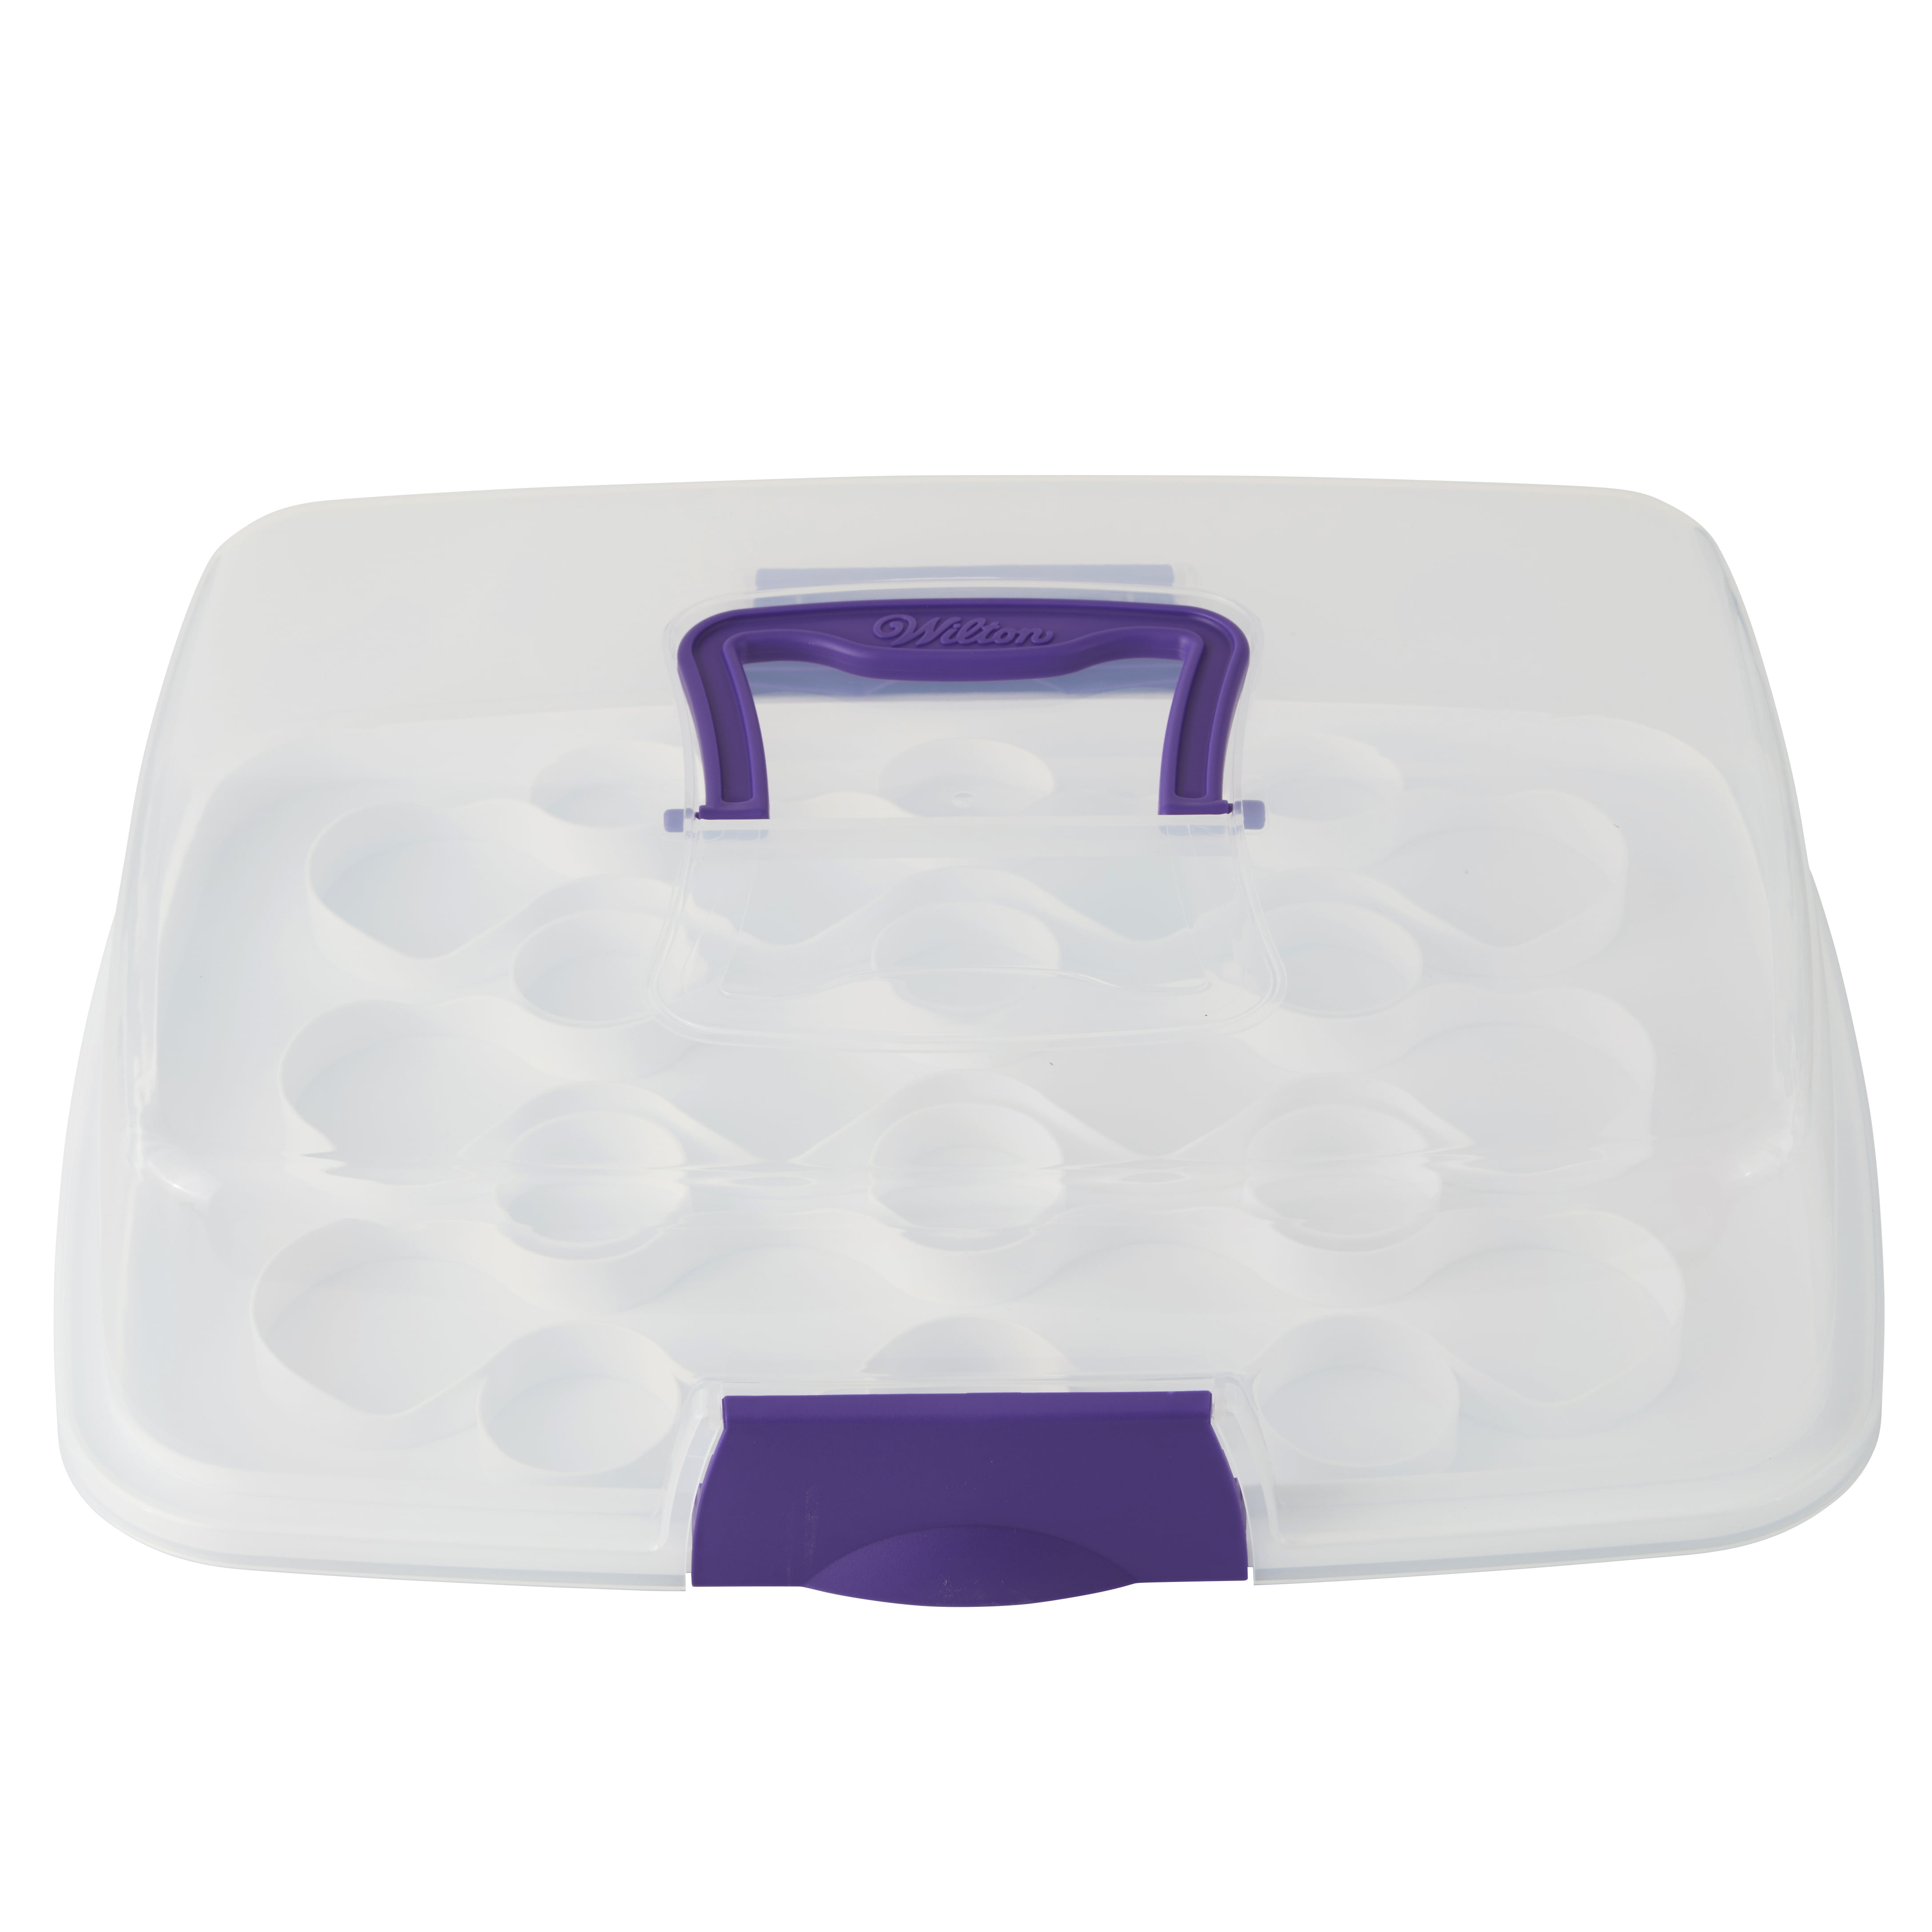 Snapware Entertainer Large Cupcake Keeper 2 Layer, 10 in X 14 in